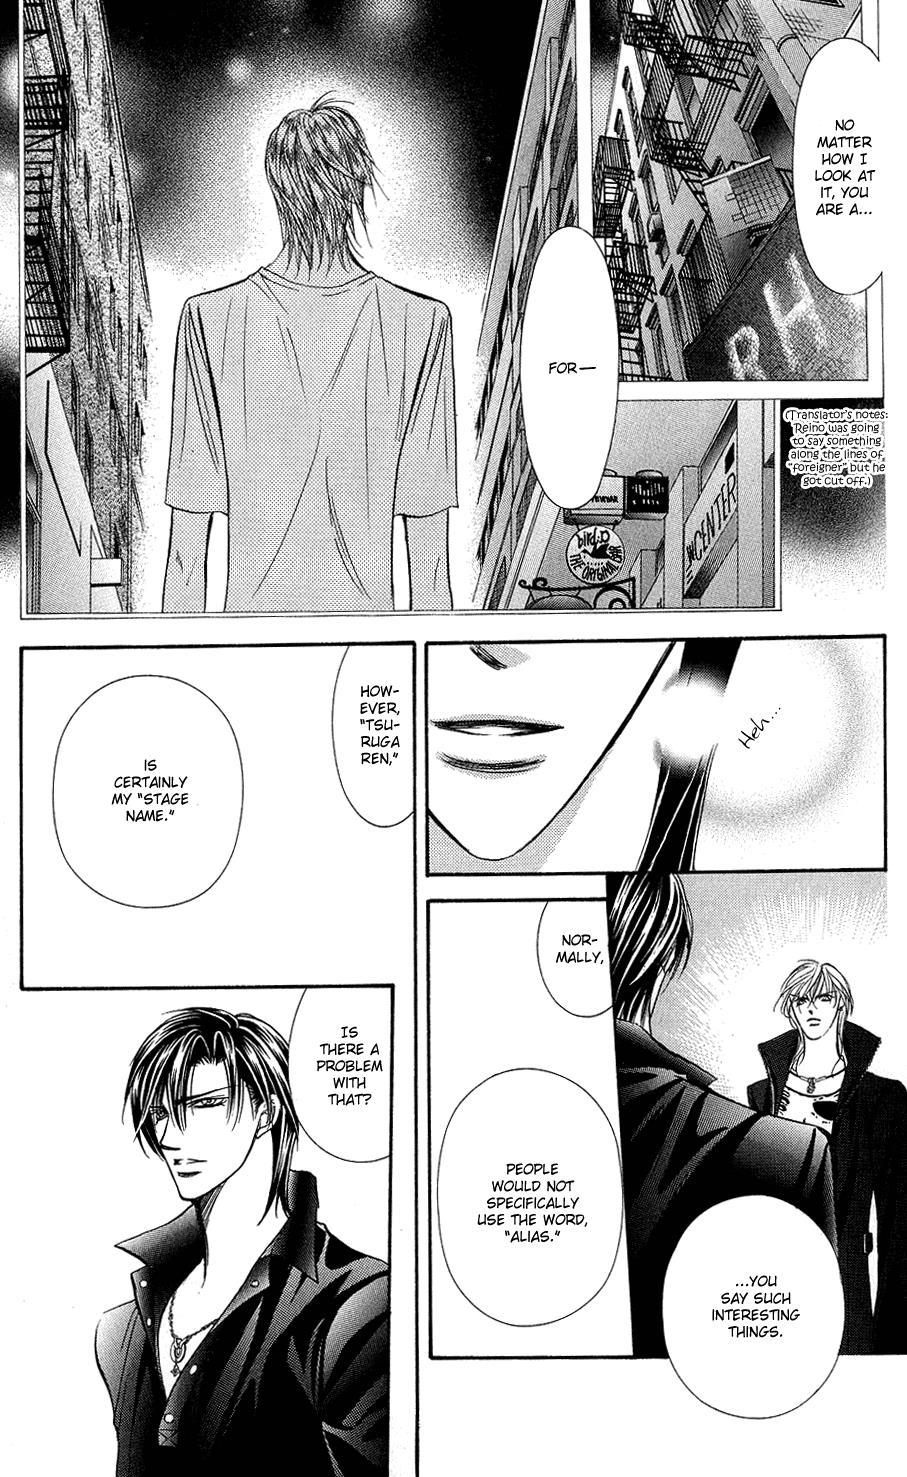 Skip Beat!, Chapter 99 Suddenly, a Love Story- The End image 06